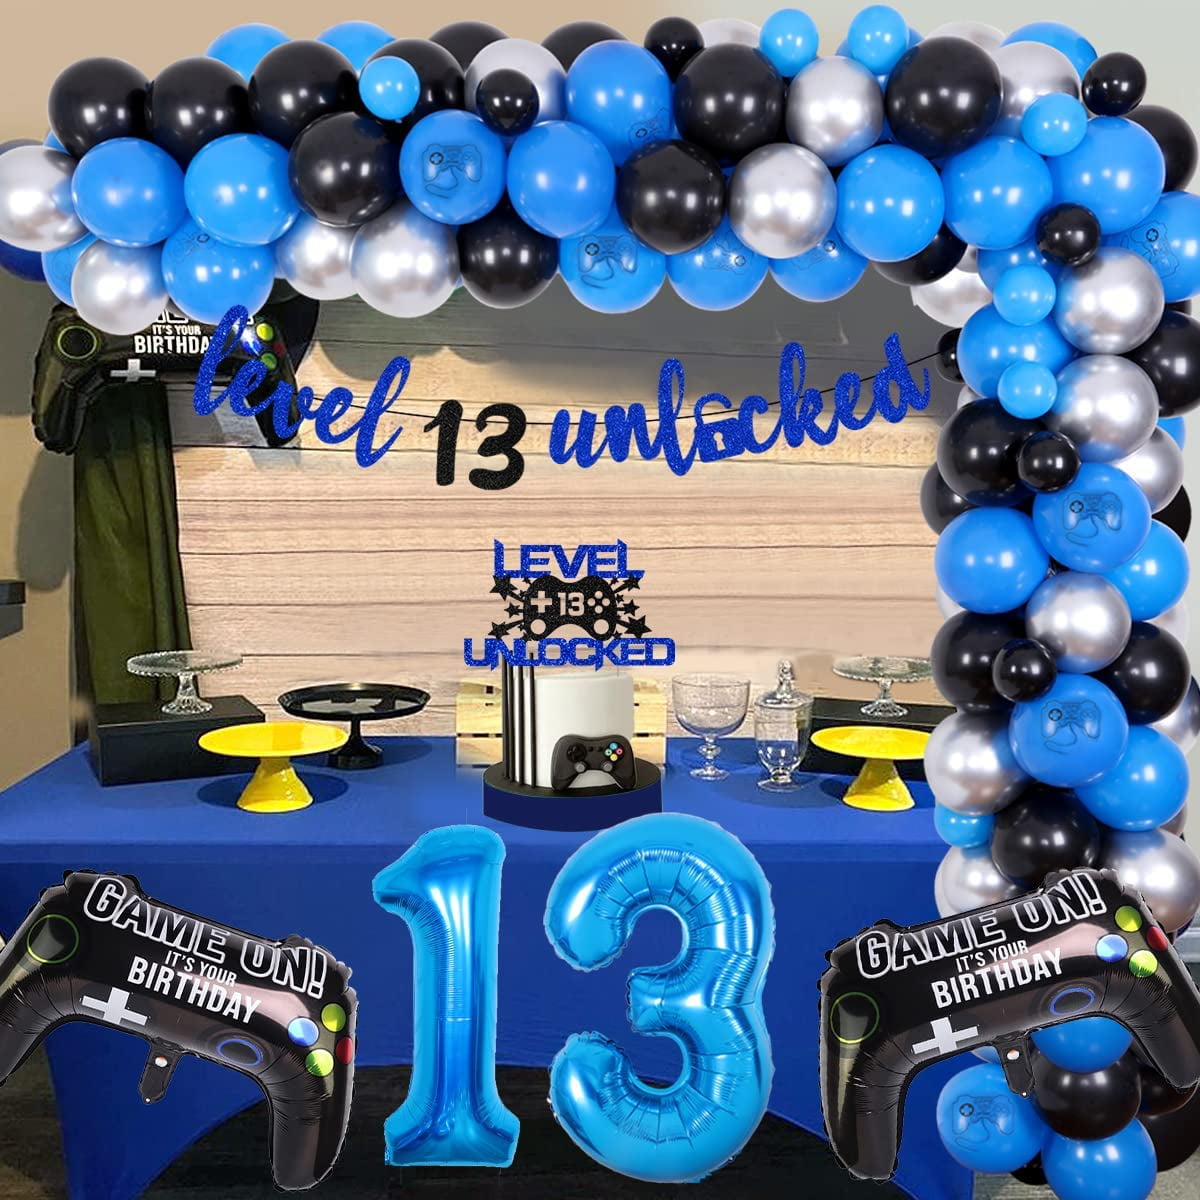 Video Game 13th Birthday Party Decorations for Boys, Level 13 Unlocked Birthday Banner Blue Balloons Arch Decorations for Gaming Party Game On Boys 13 Years Old Birthday Party Supplies - Walmart.com